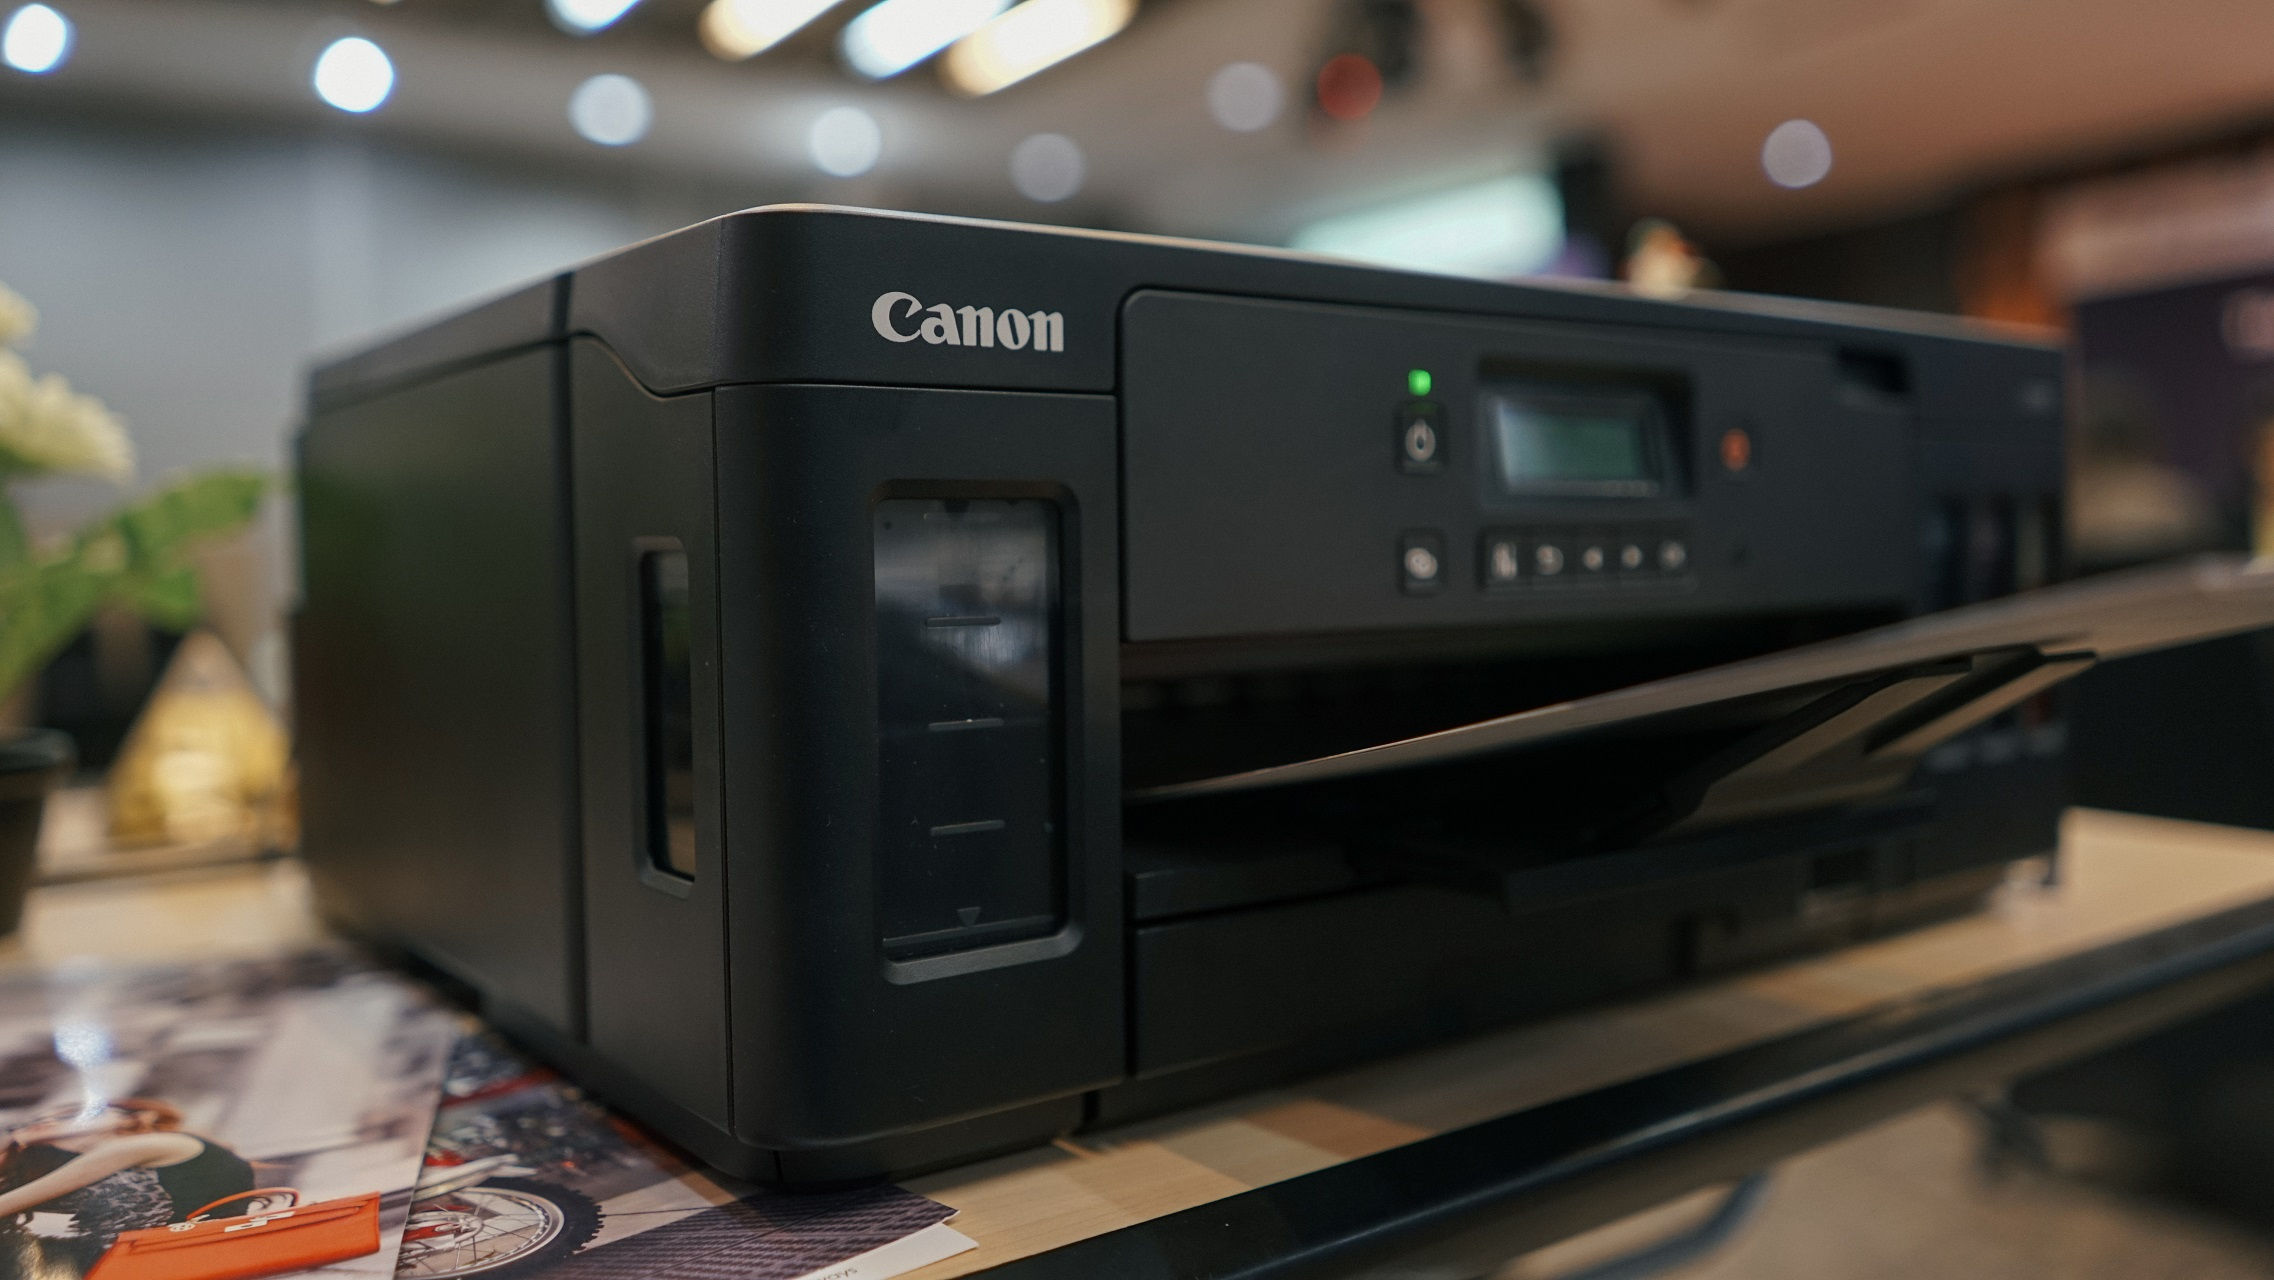 How to Fix Canon error B200 on all printer models